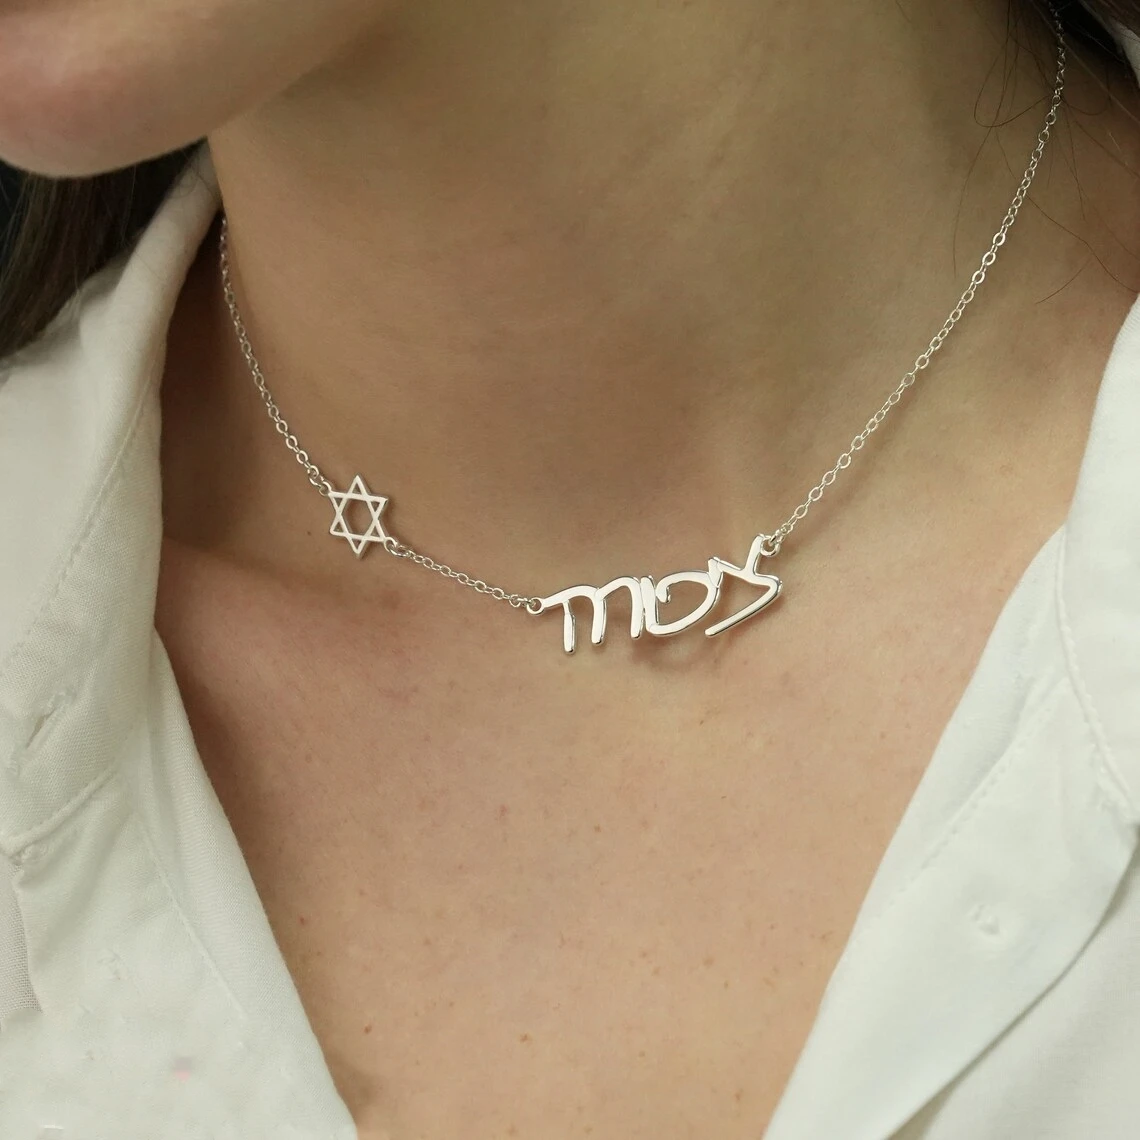 Custom Name Necklace Stainless Steel Hebrew Name Star Necklace Women's Girl Friend Gift Jewelry Gift